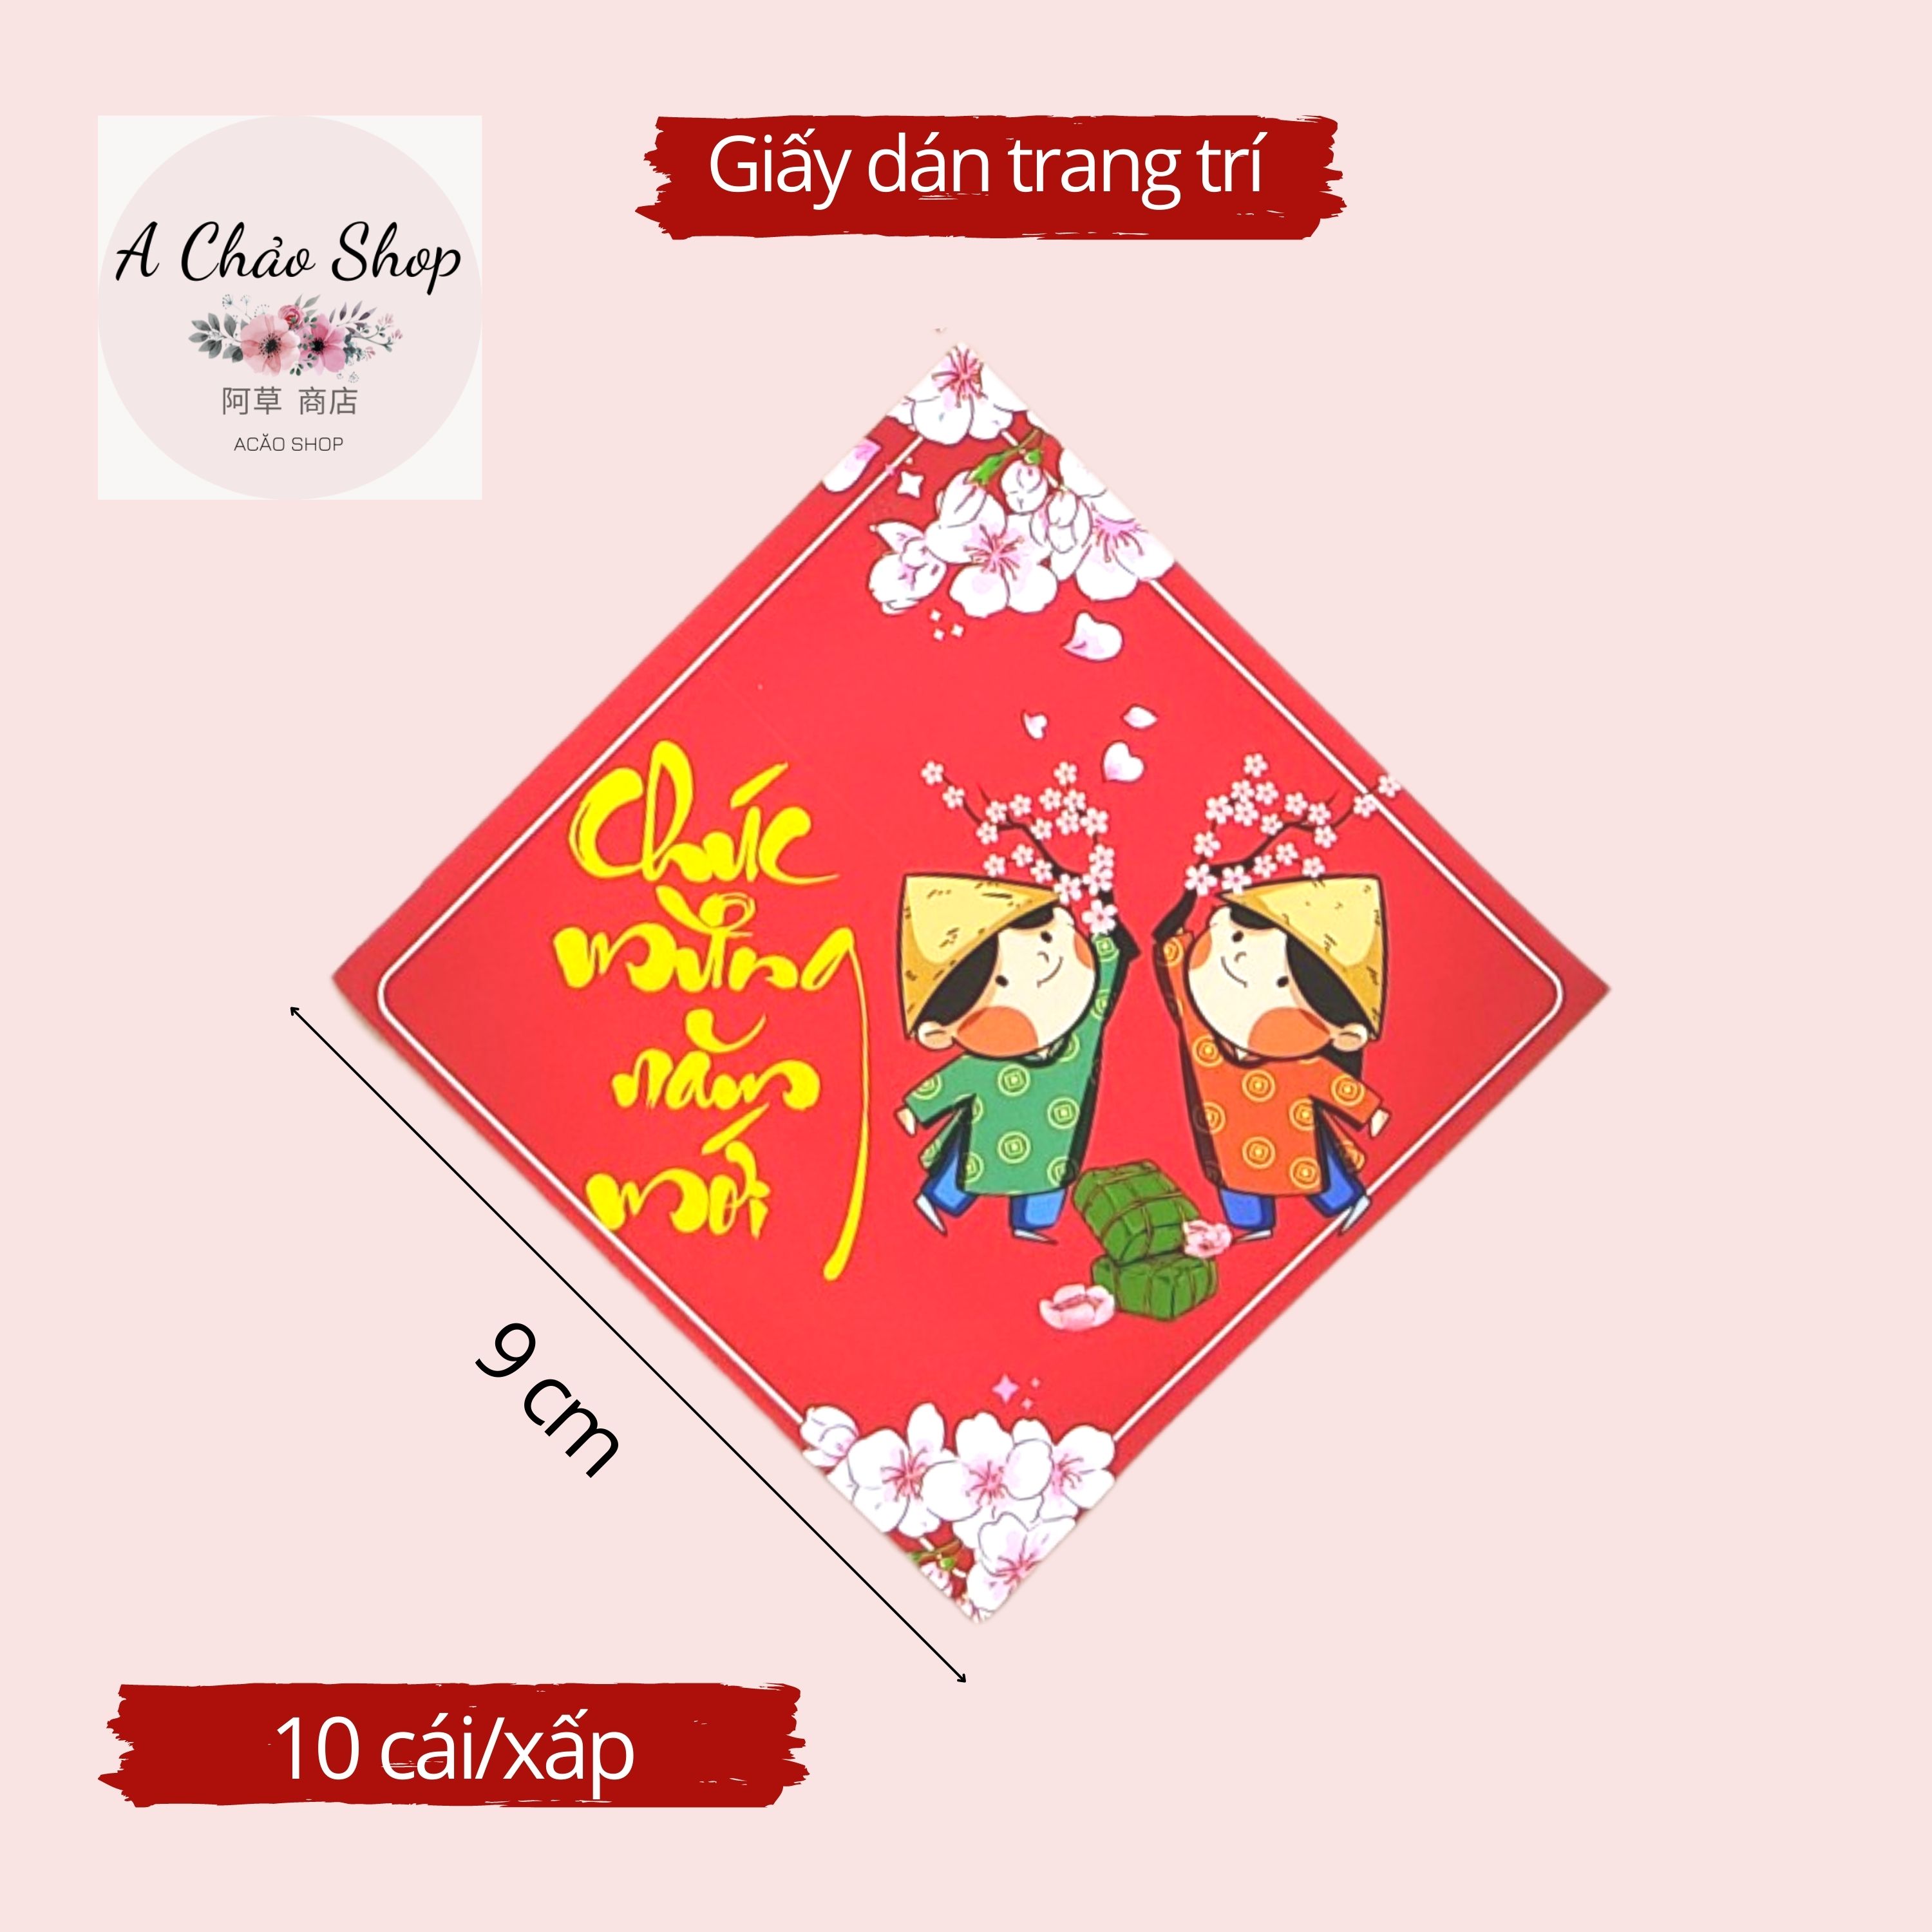 Home decoration for Lunar New Year - Tet 2023, Tet stickers 10 pcs pack